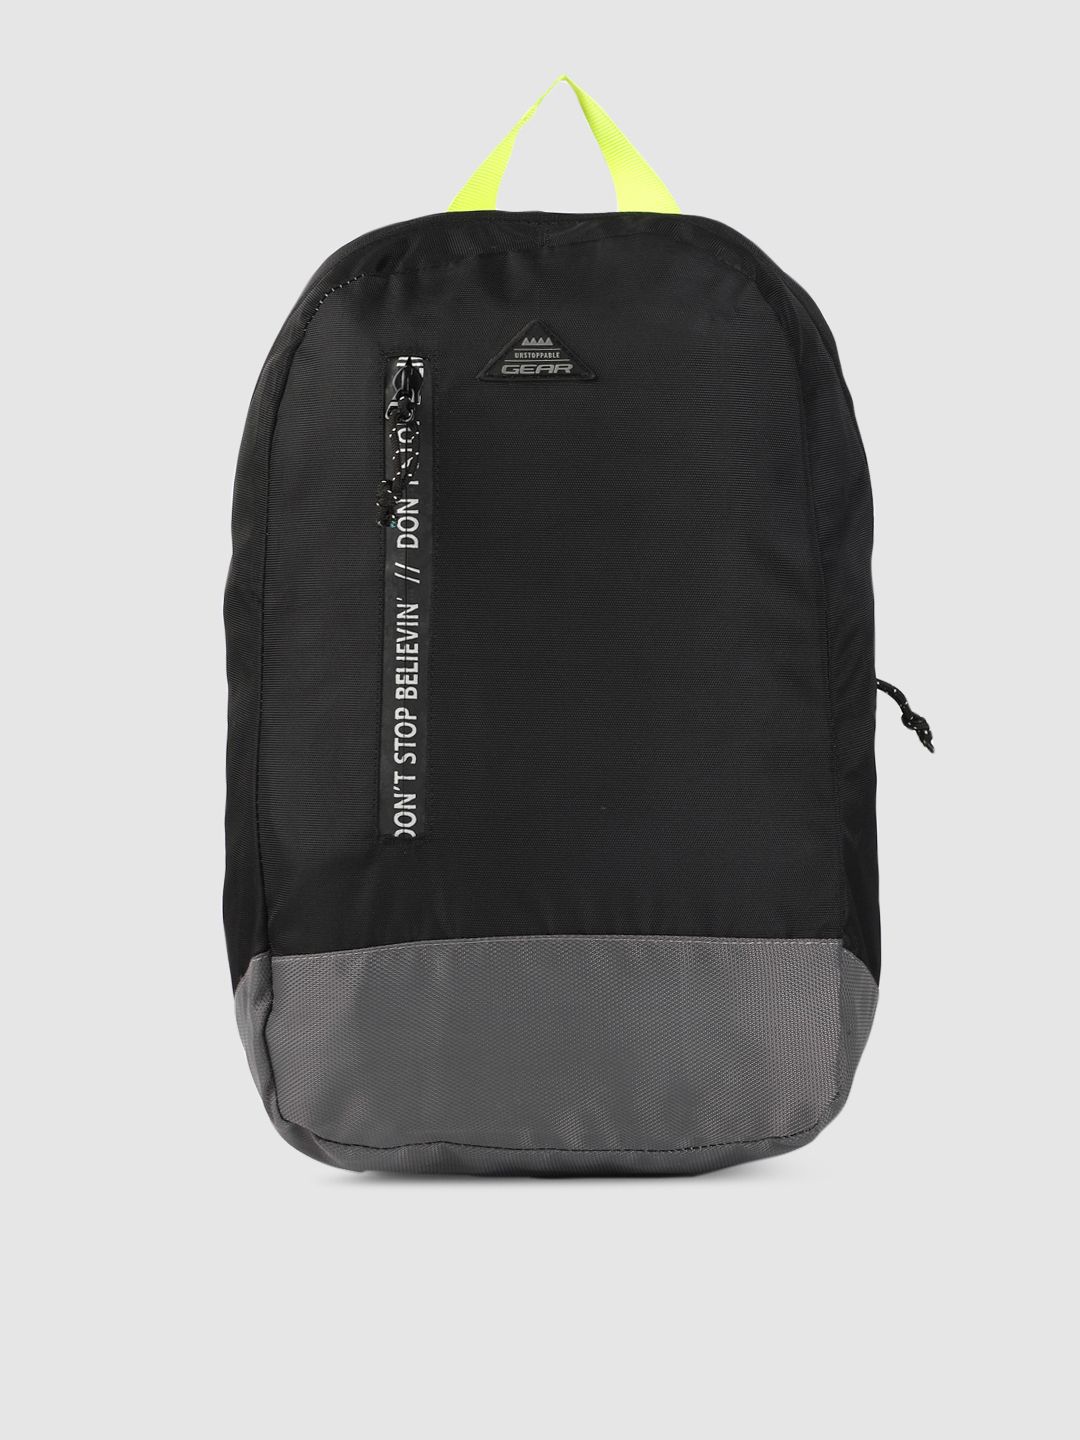 Gear Unisex Black & Grey Colourblocked Superior Backpack Price in India